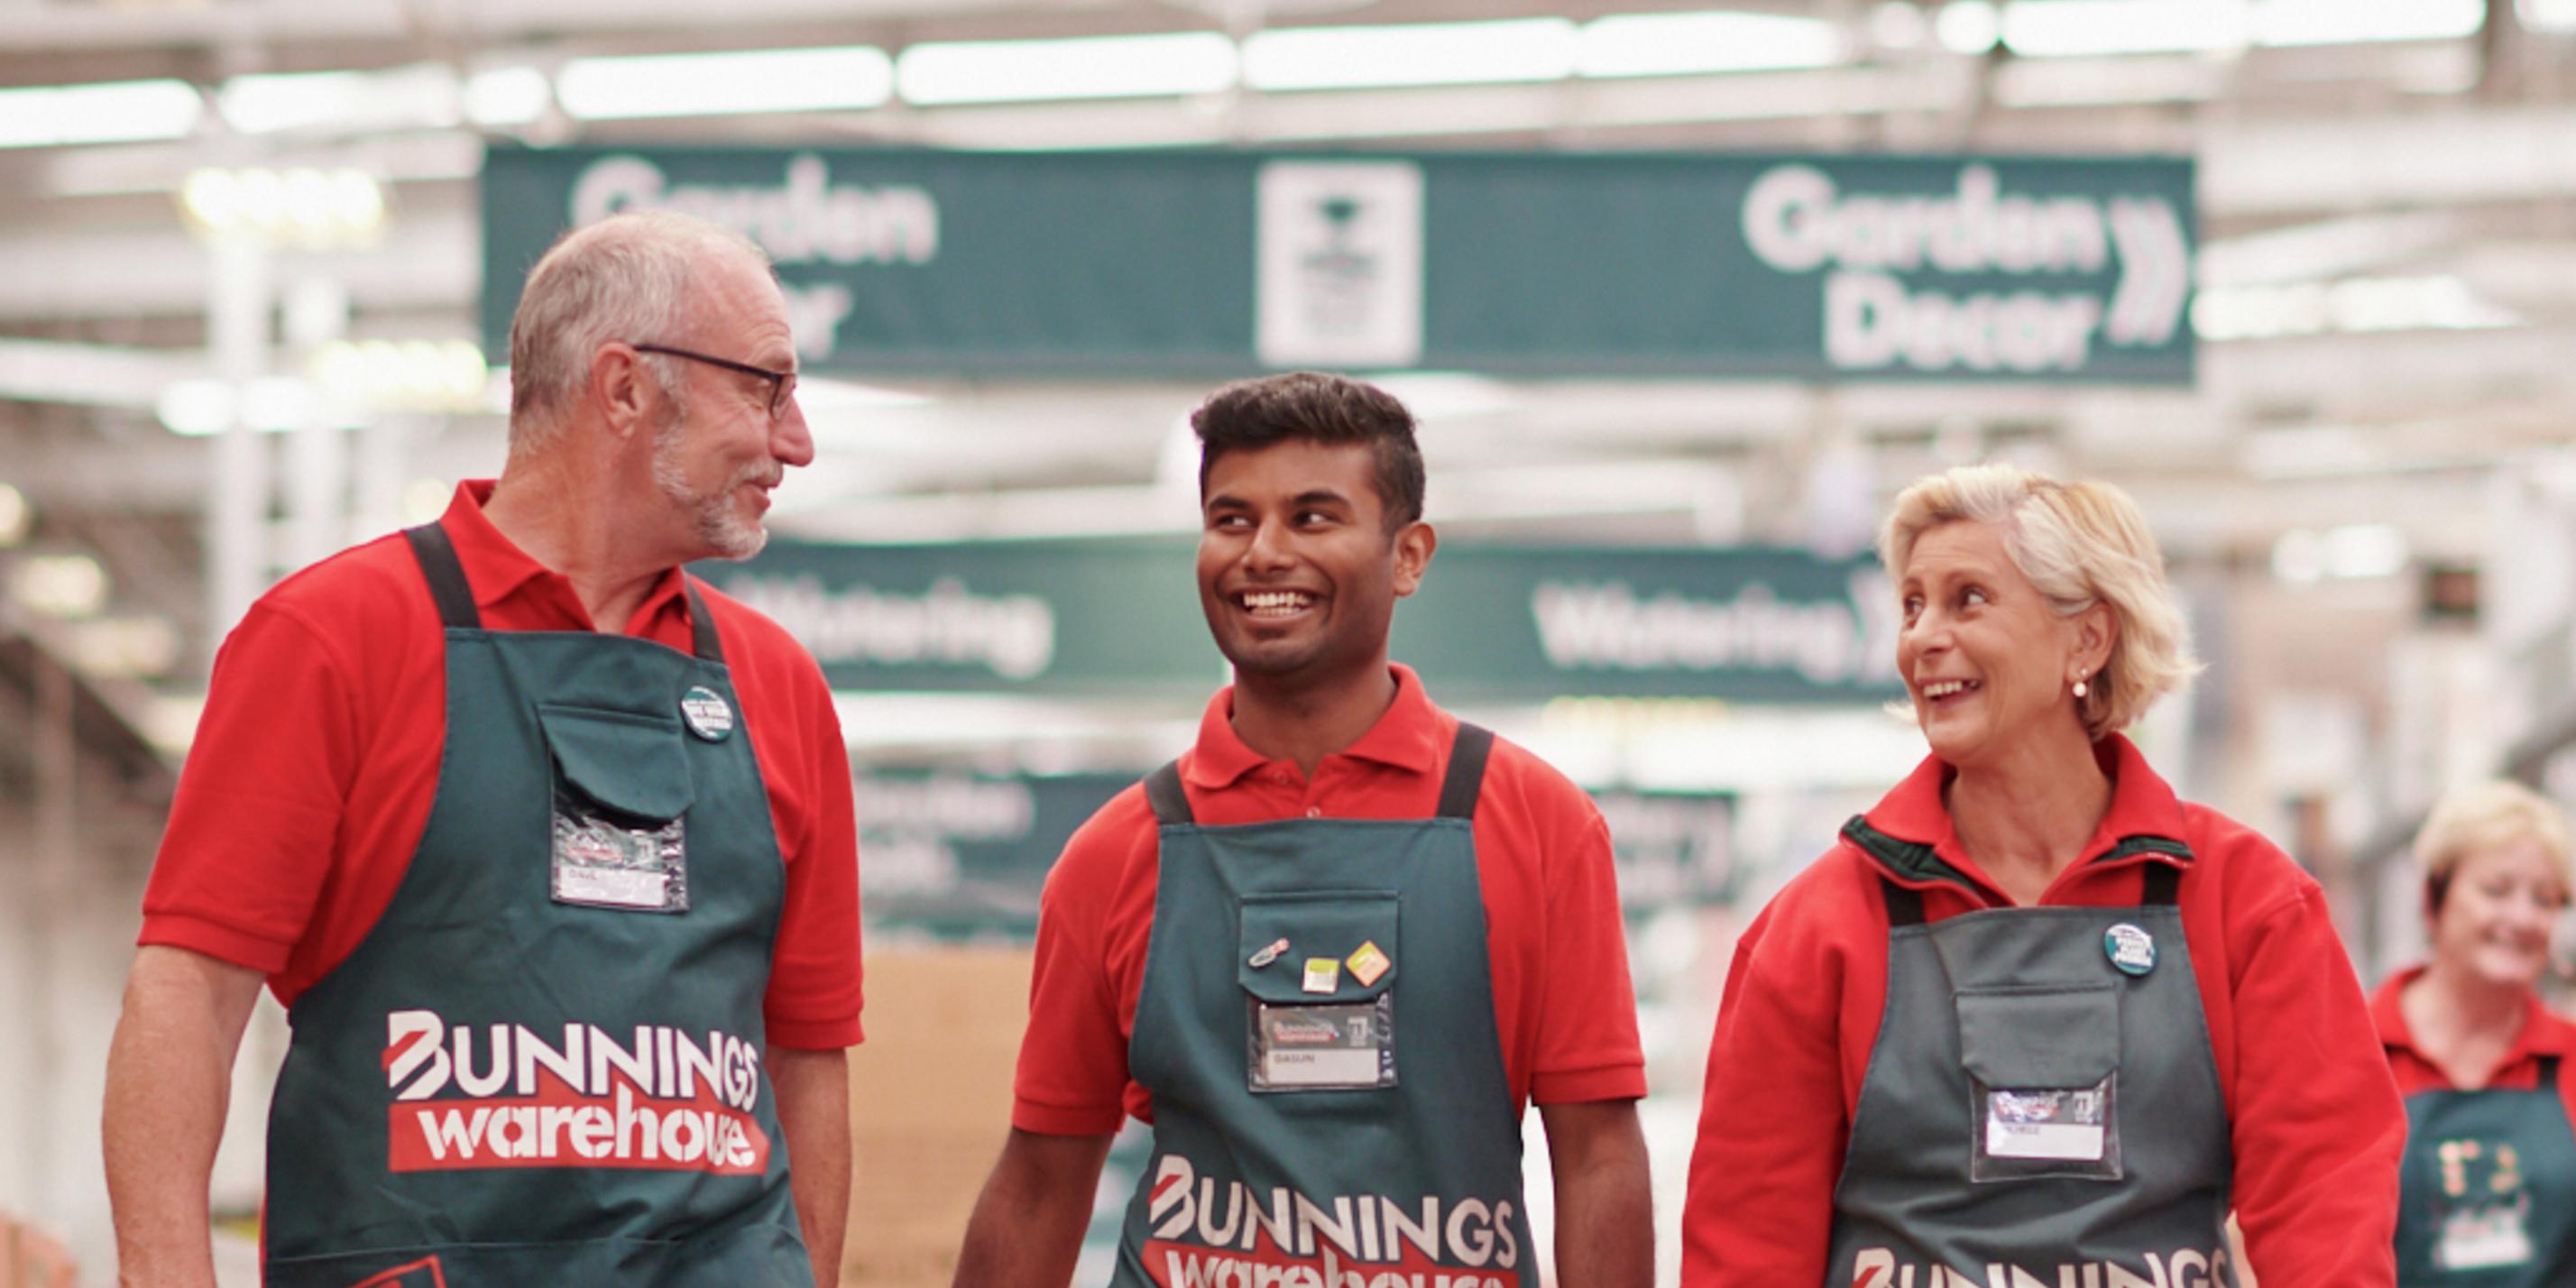 apply for jobs at bunnings